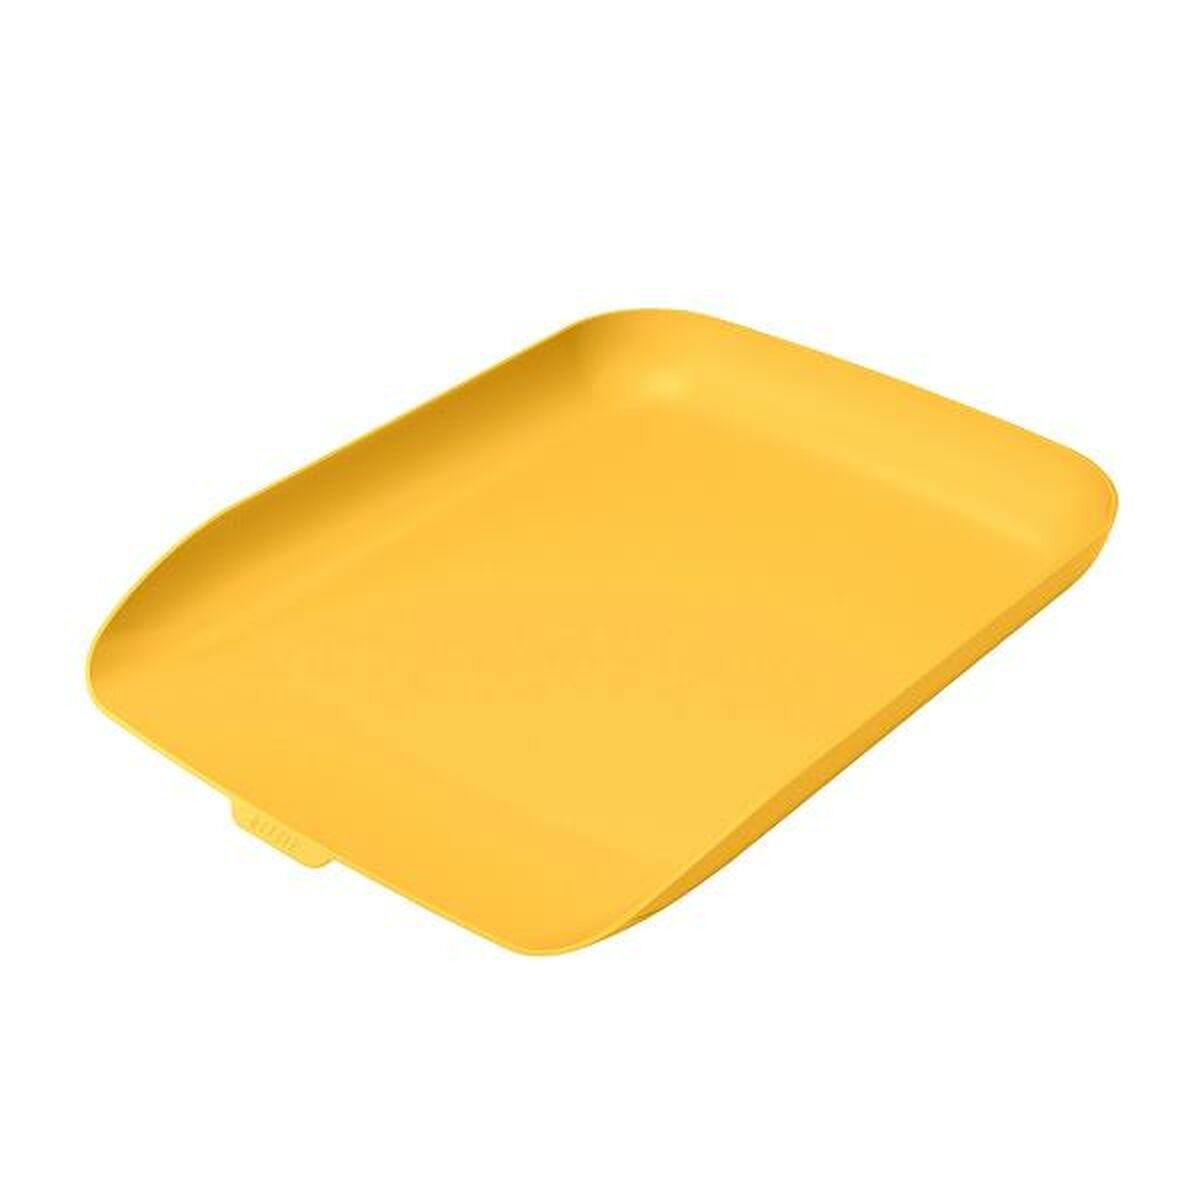 Filing Tray Leitz 53580019 Yellow Card A4 (1 Unit)